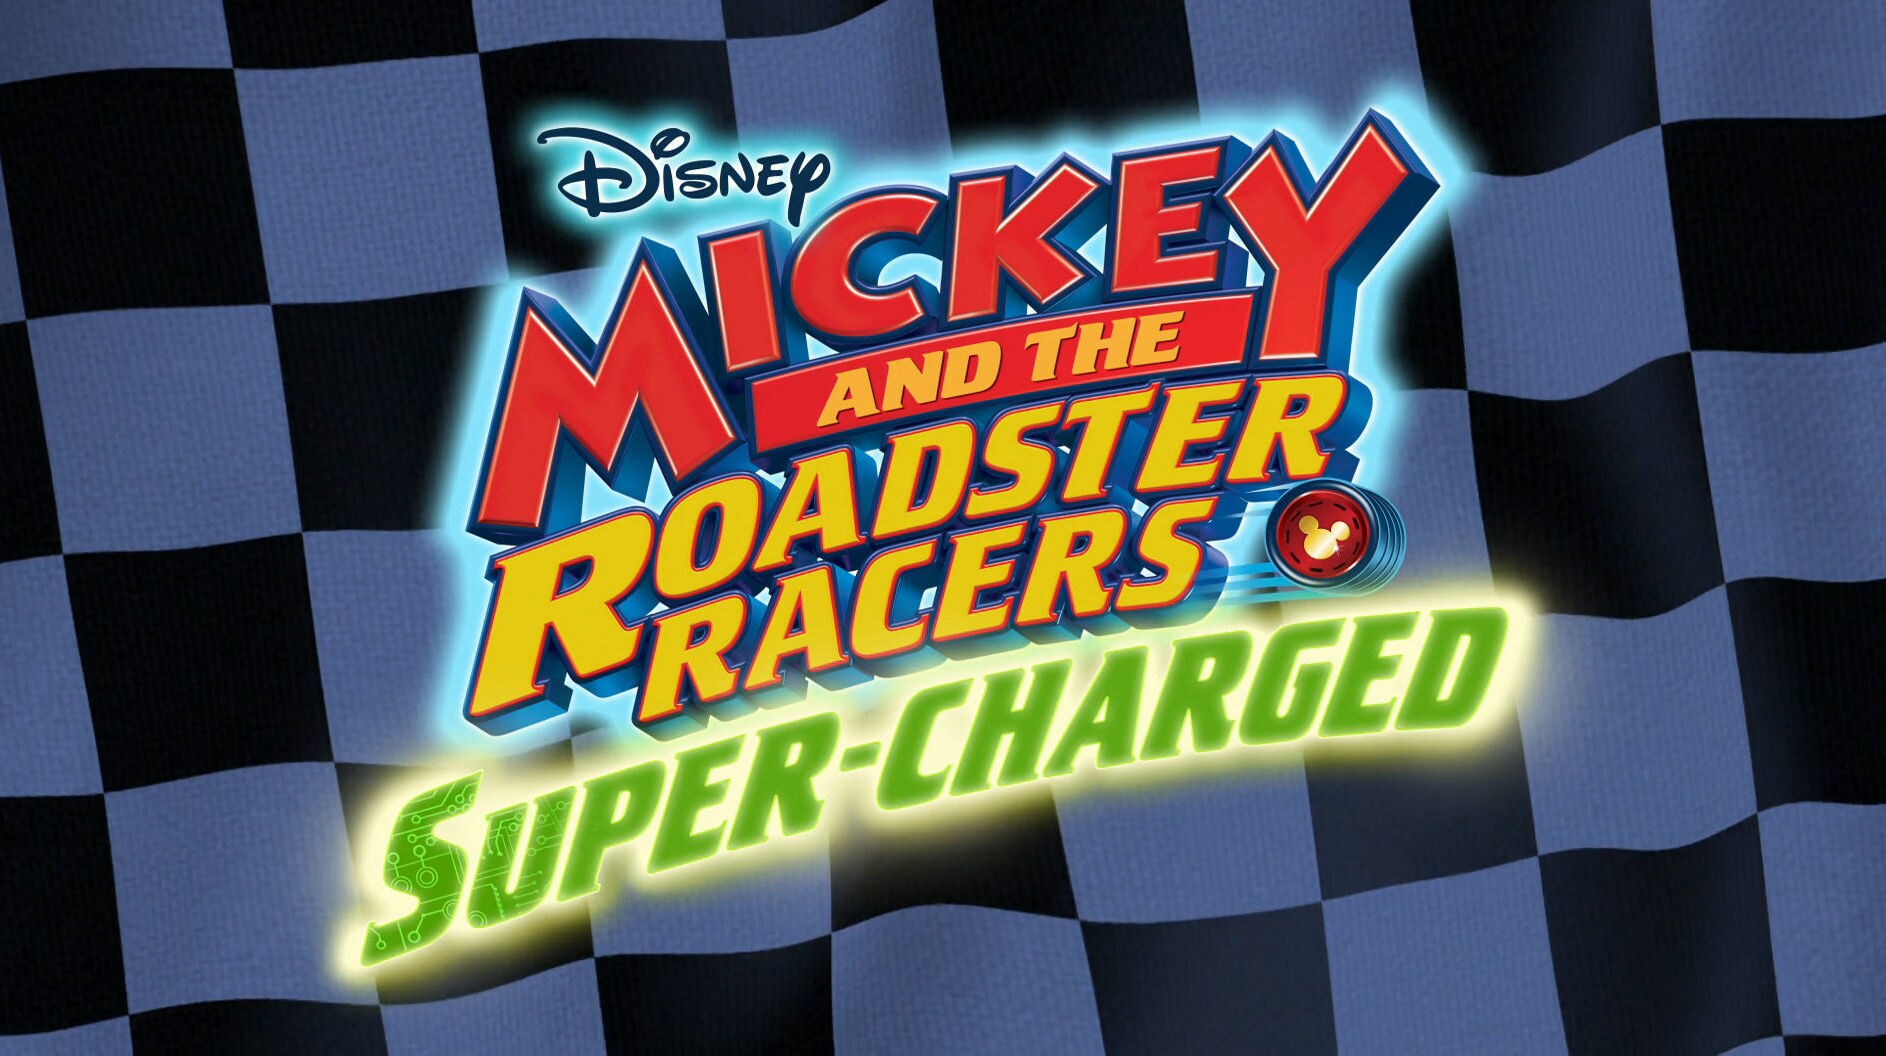 Mickey and The Roadster Racers: Supercharged Teaser